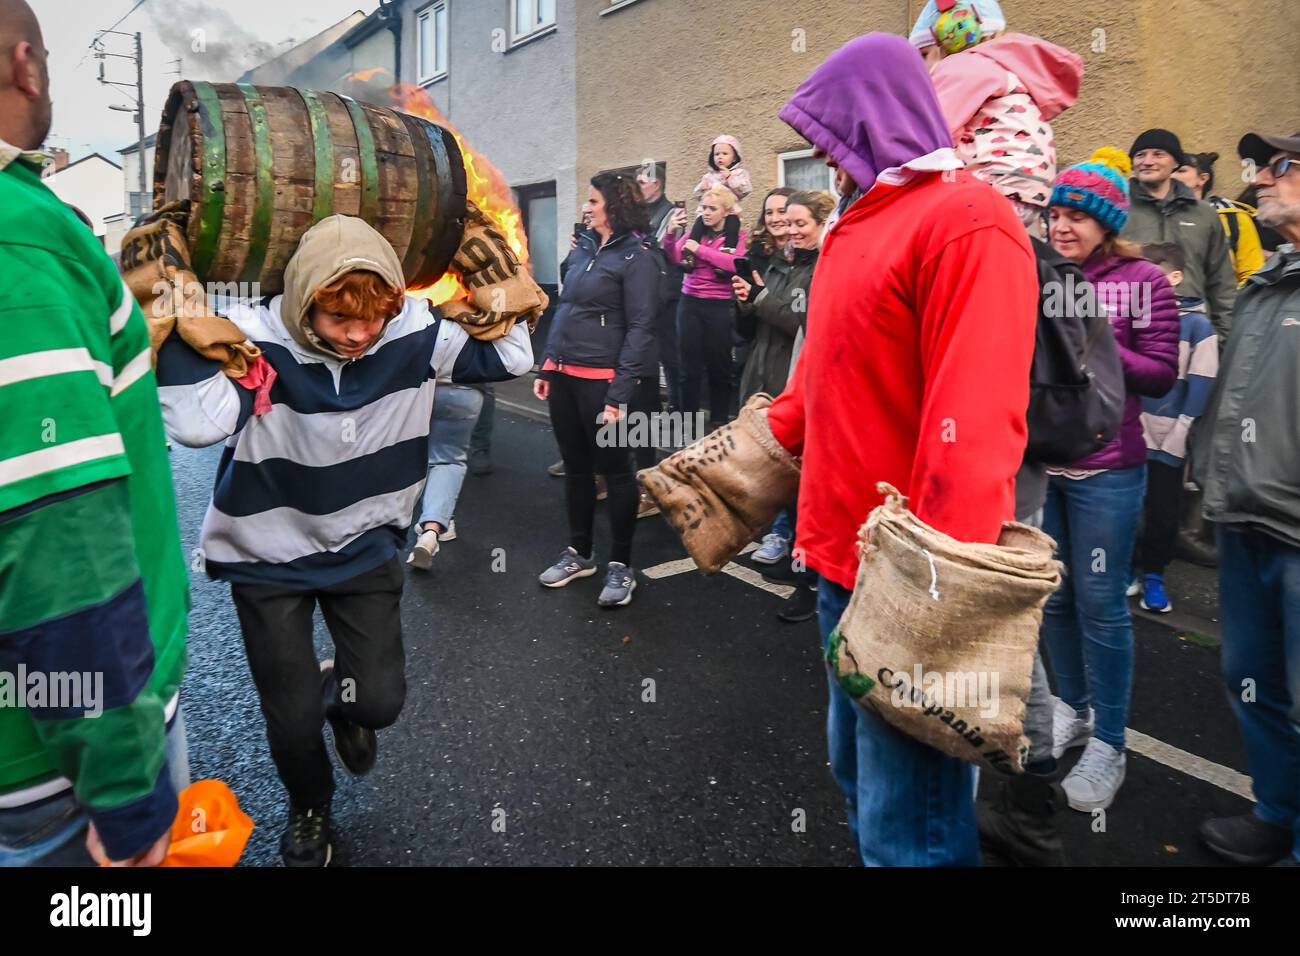 Ottery St Mary, UK. Saturday 4 November 2023. Brave children, as young as 7, take part in the Ottery St Mary Burning Tar Barrels. Running with burning barrels through the streets of Ottery St Mary, Devon in a traditional event stretching back hundreds of years. Credit: Thomas Faull/Alamy Live News Stock Photo